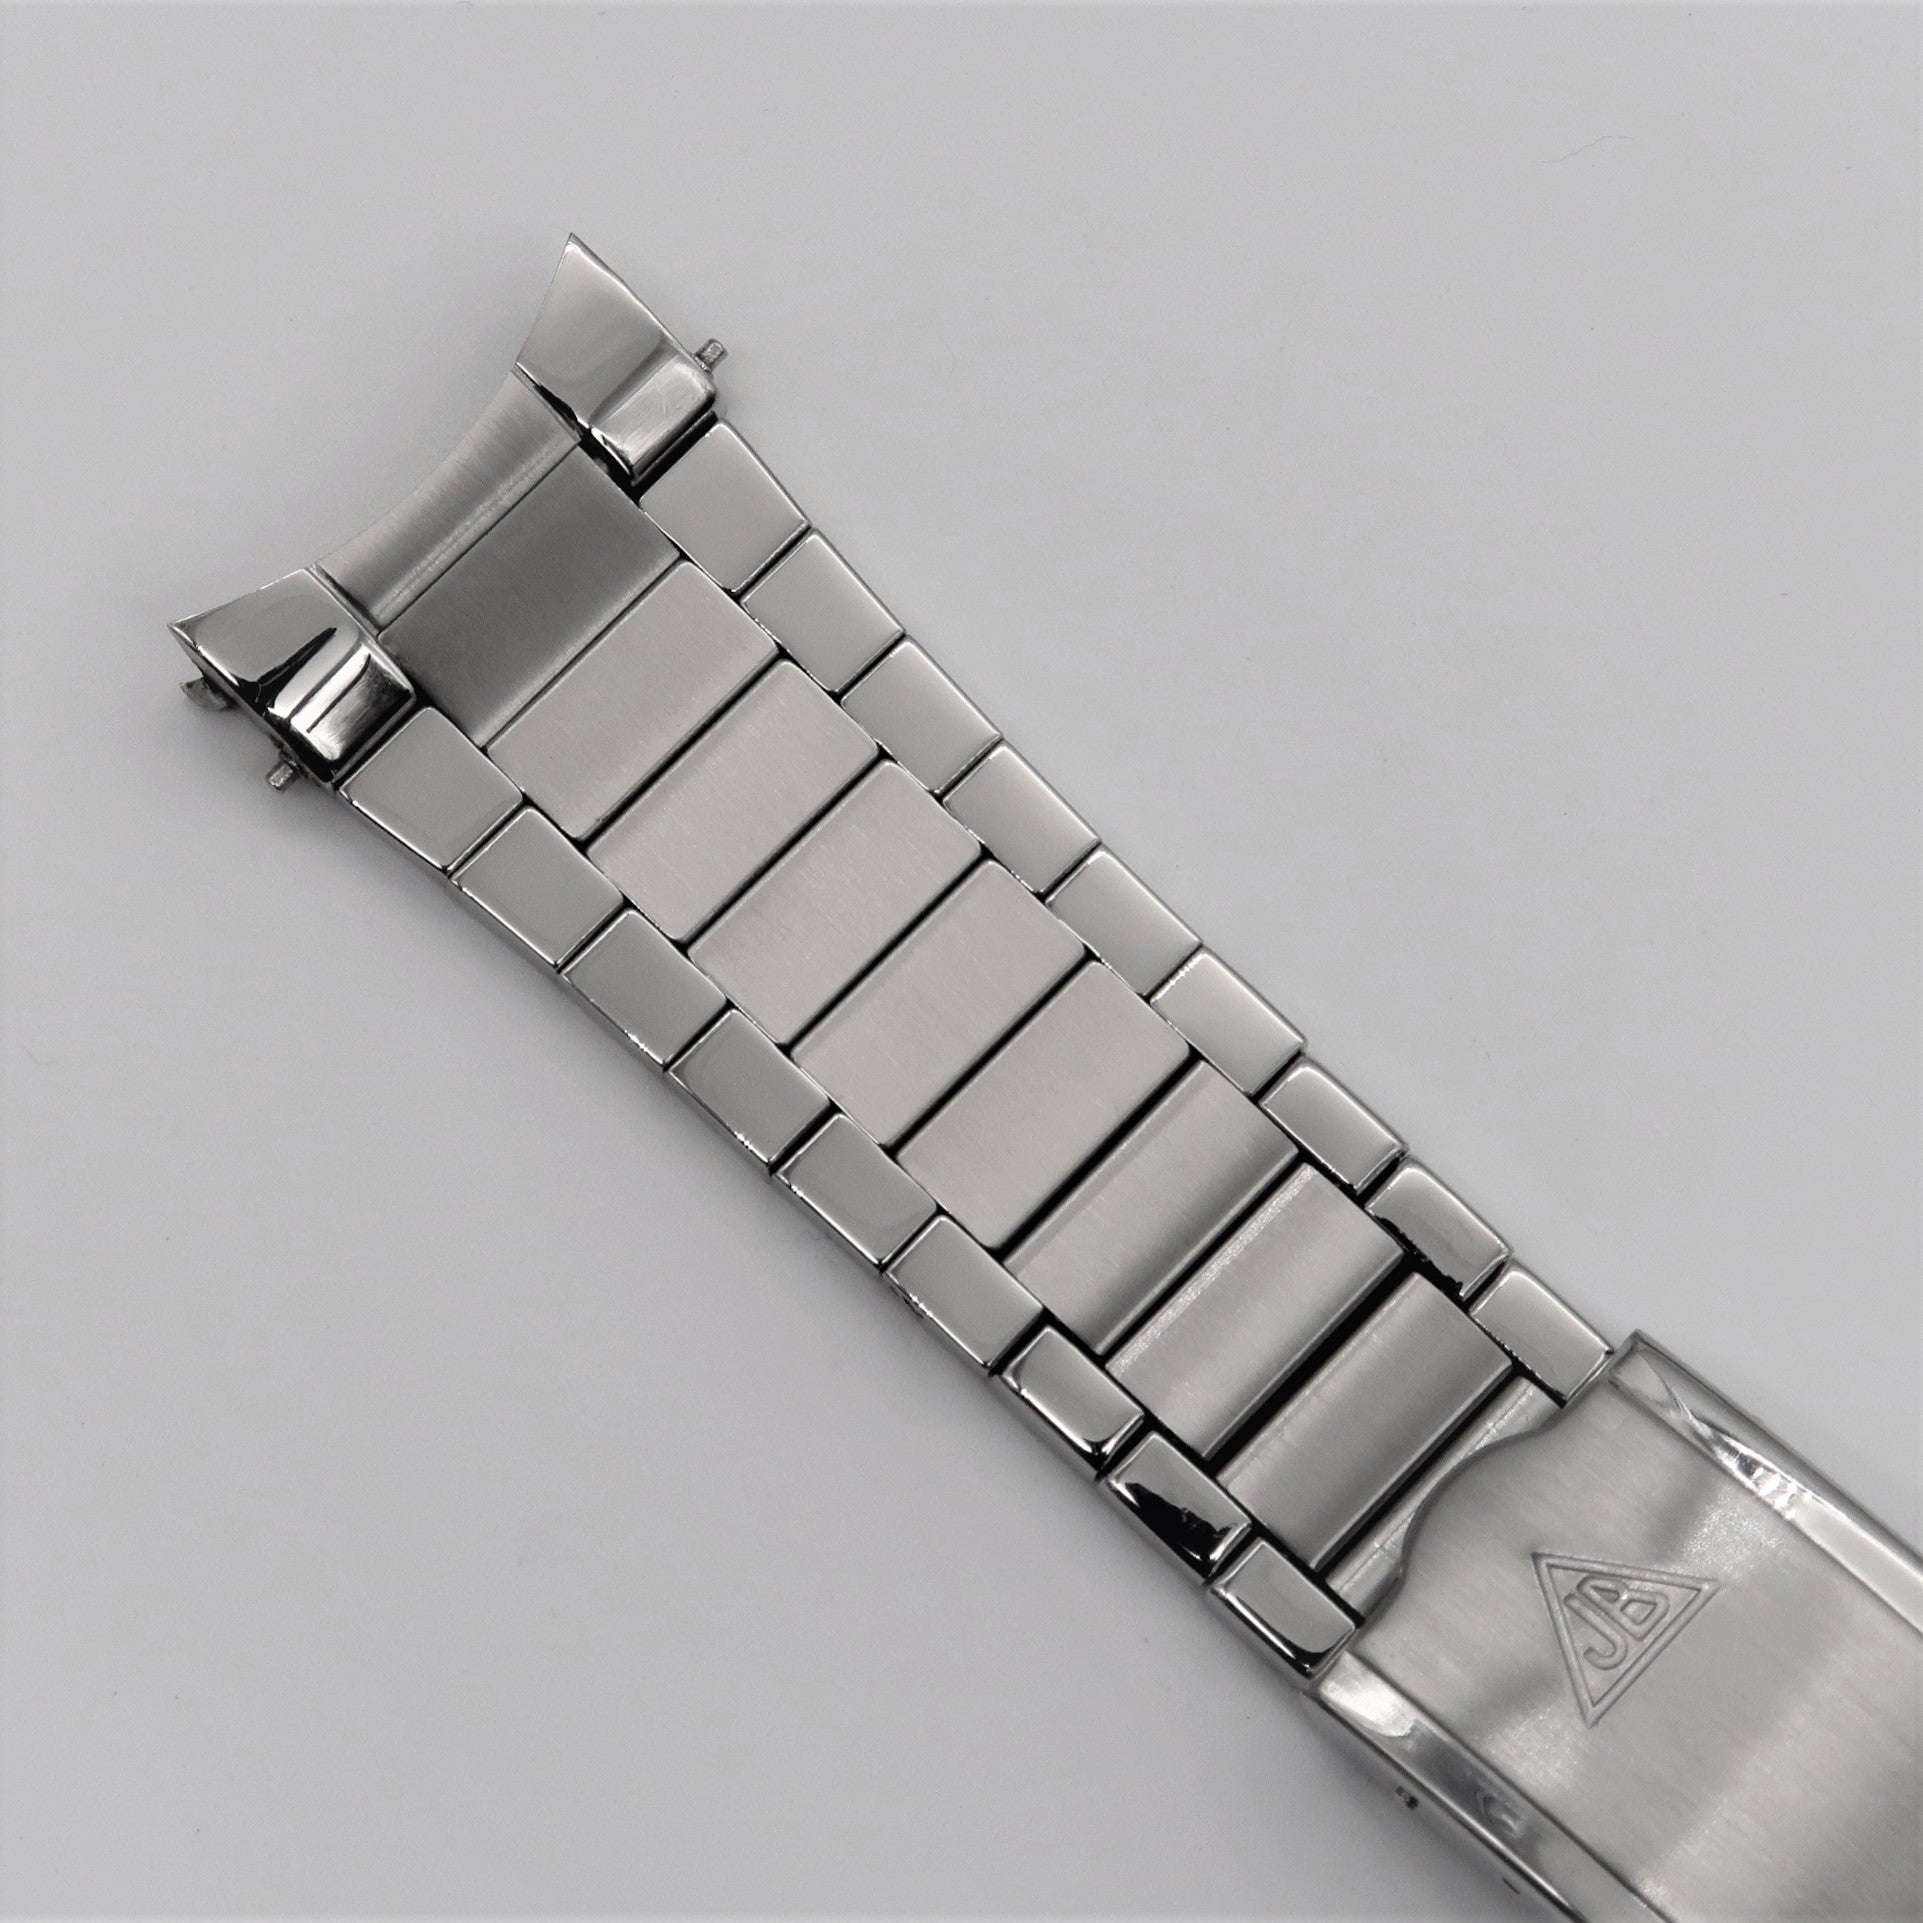 Genuine Omega Seamaster bracelet, for Chronograph, 1504/826, 20mm width,  good condition. | WatchUSeek Watch Forums